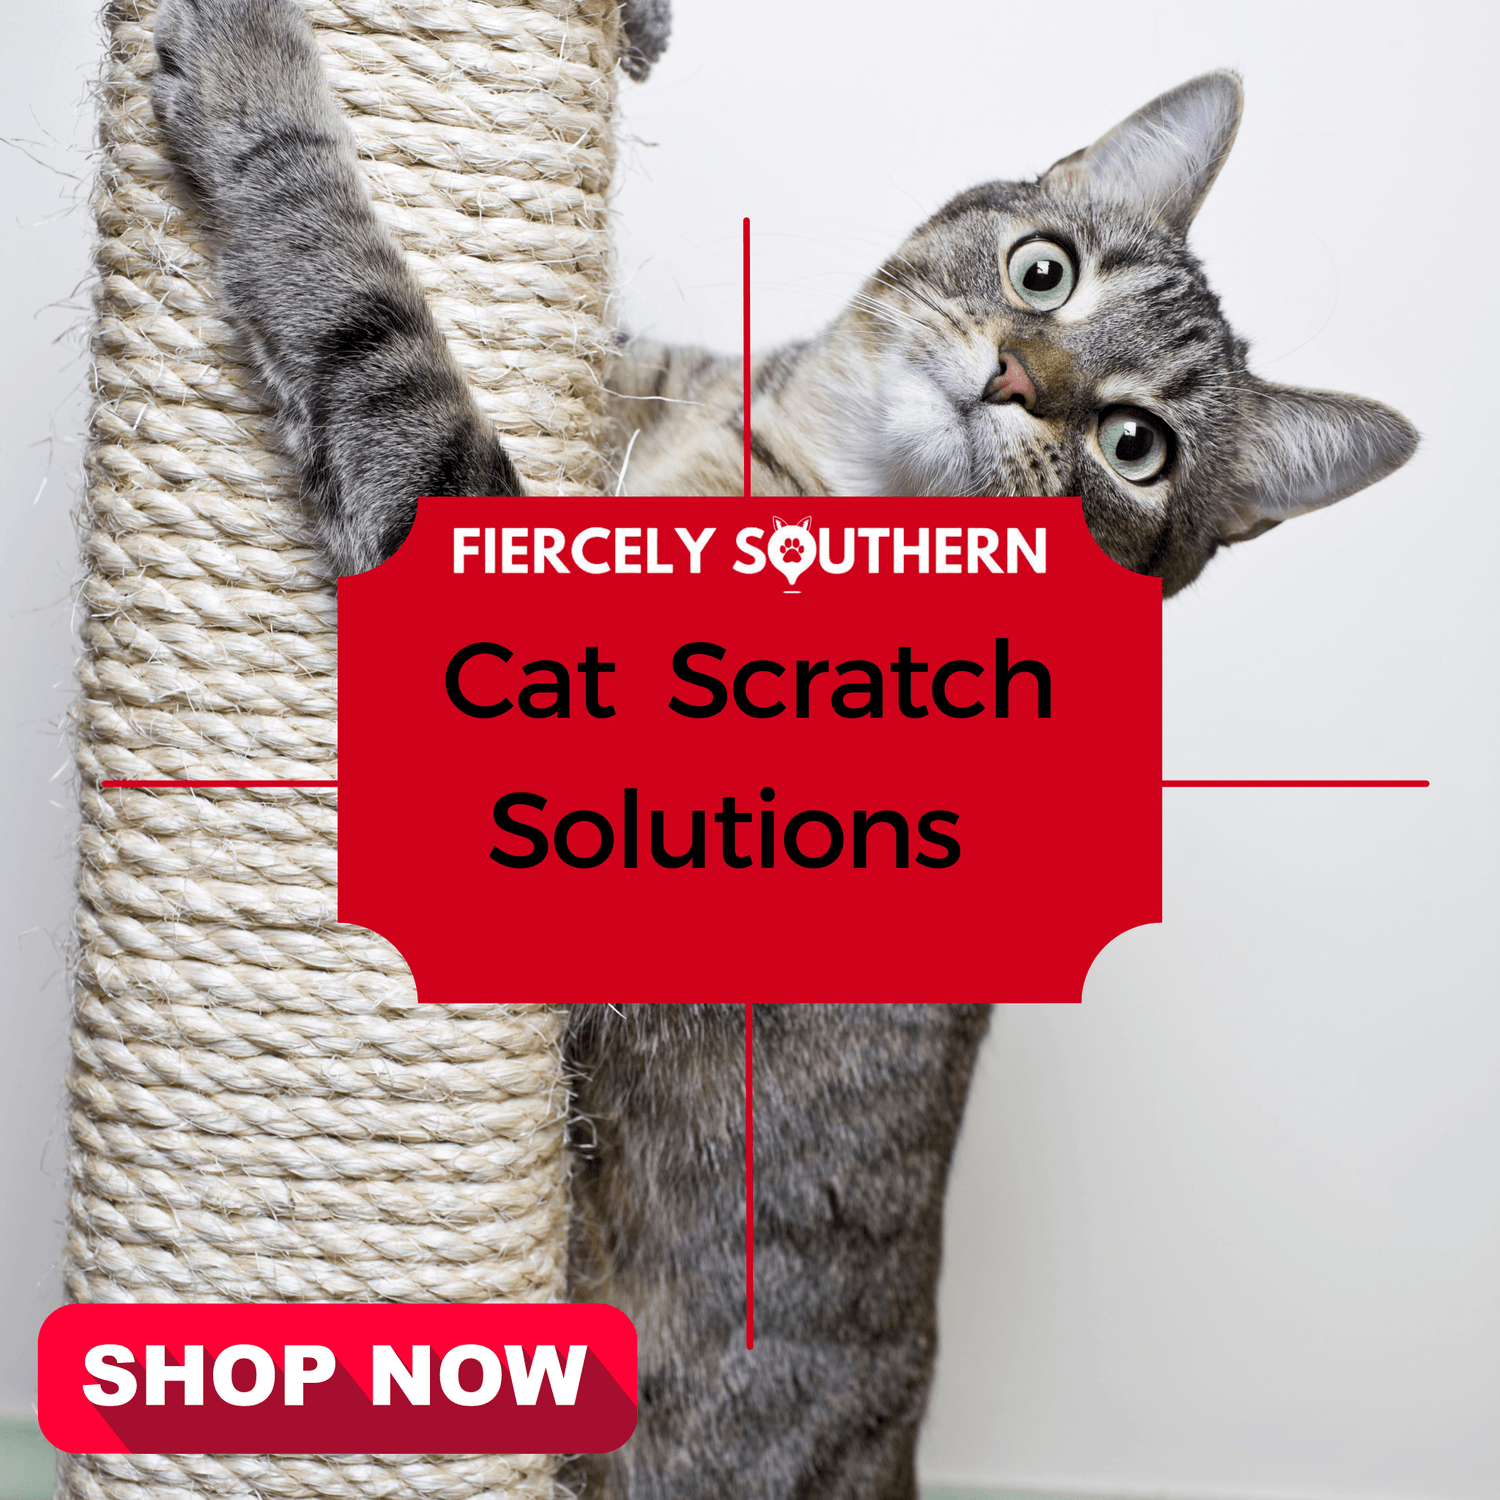 Cat Scratch Solutions - Fiercely Southern